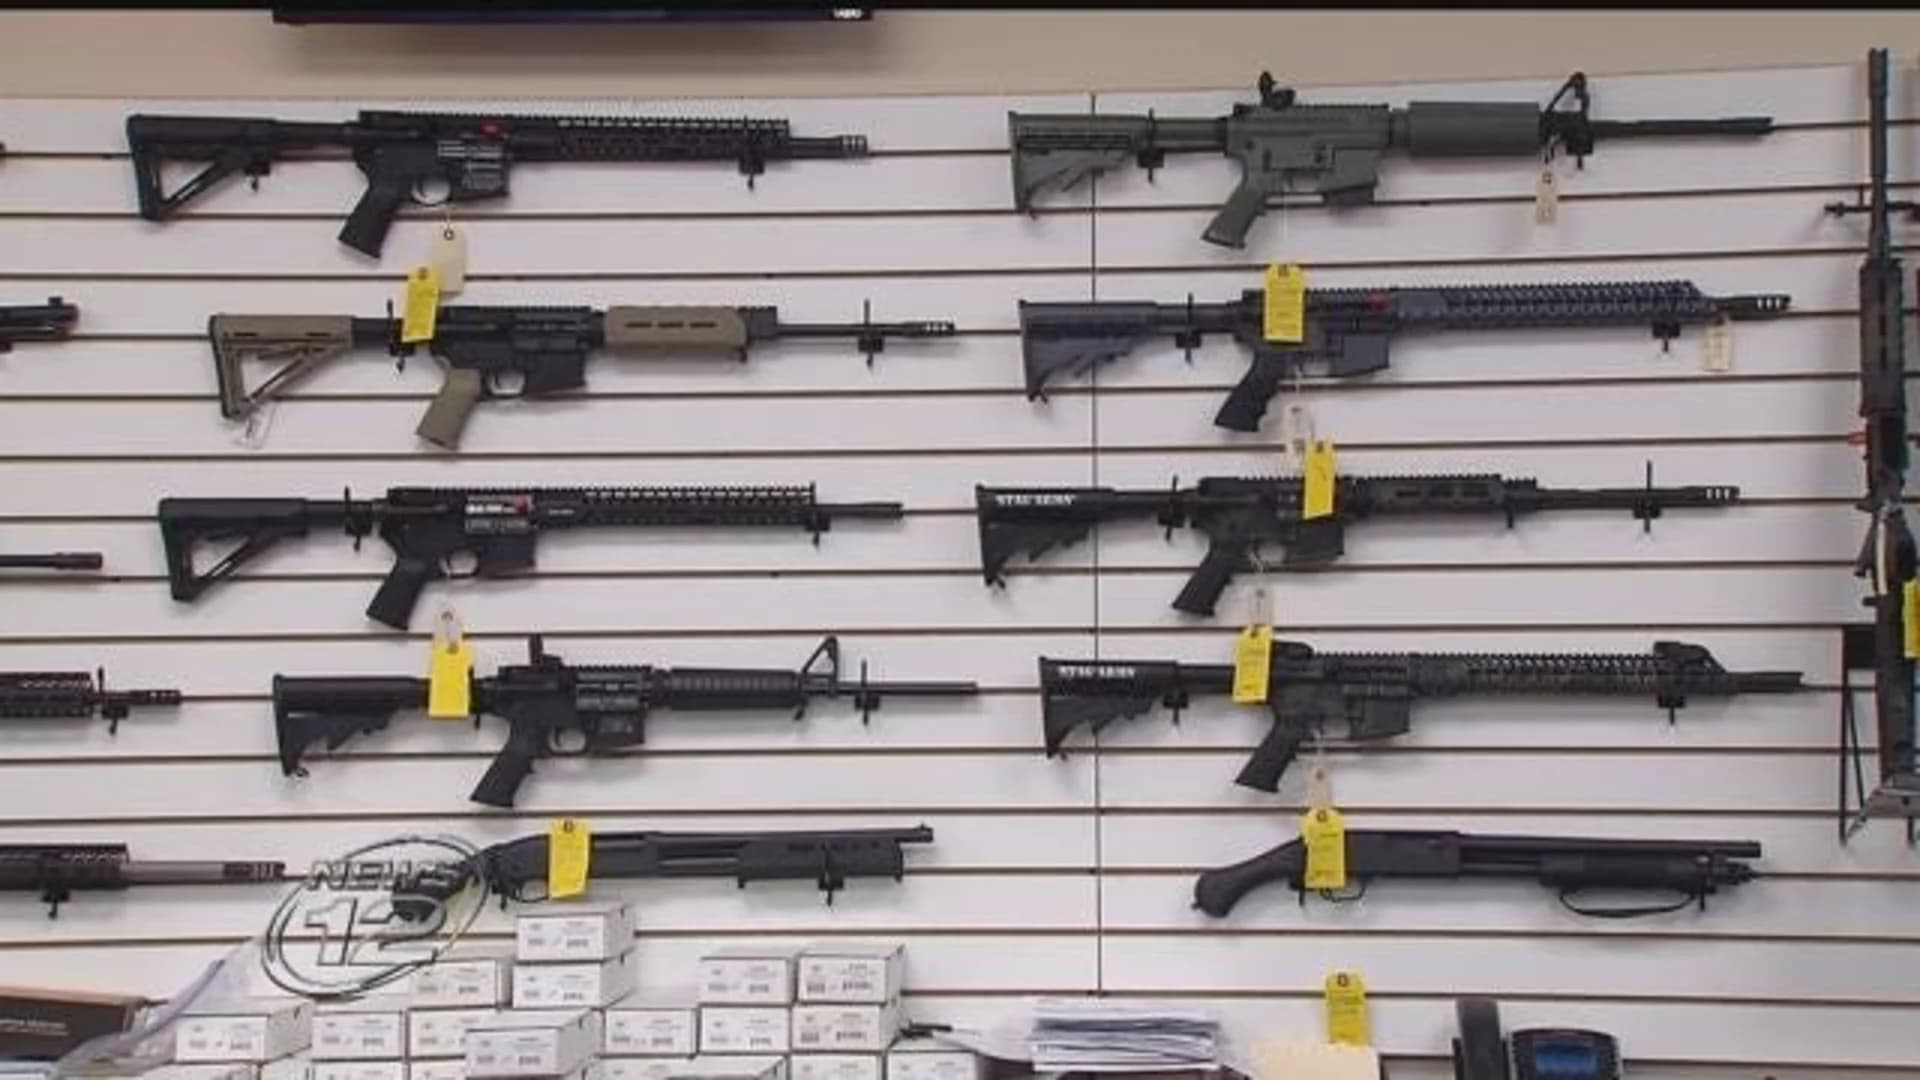 Murphy’s call for permit price hike draws ire of gun owners